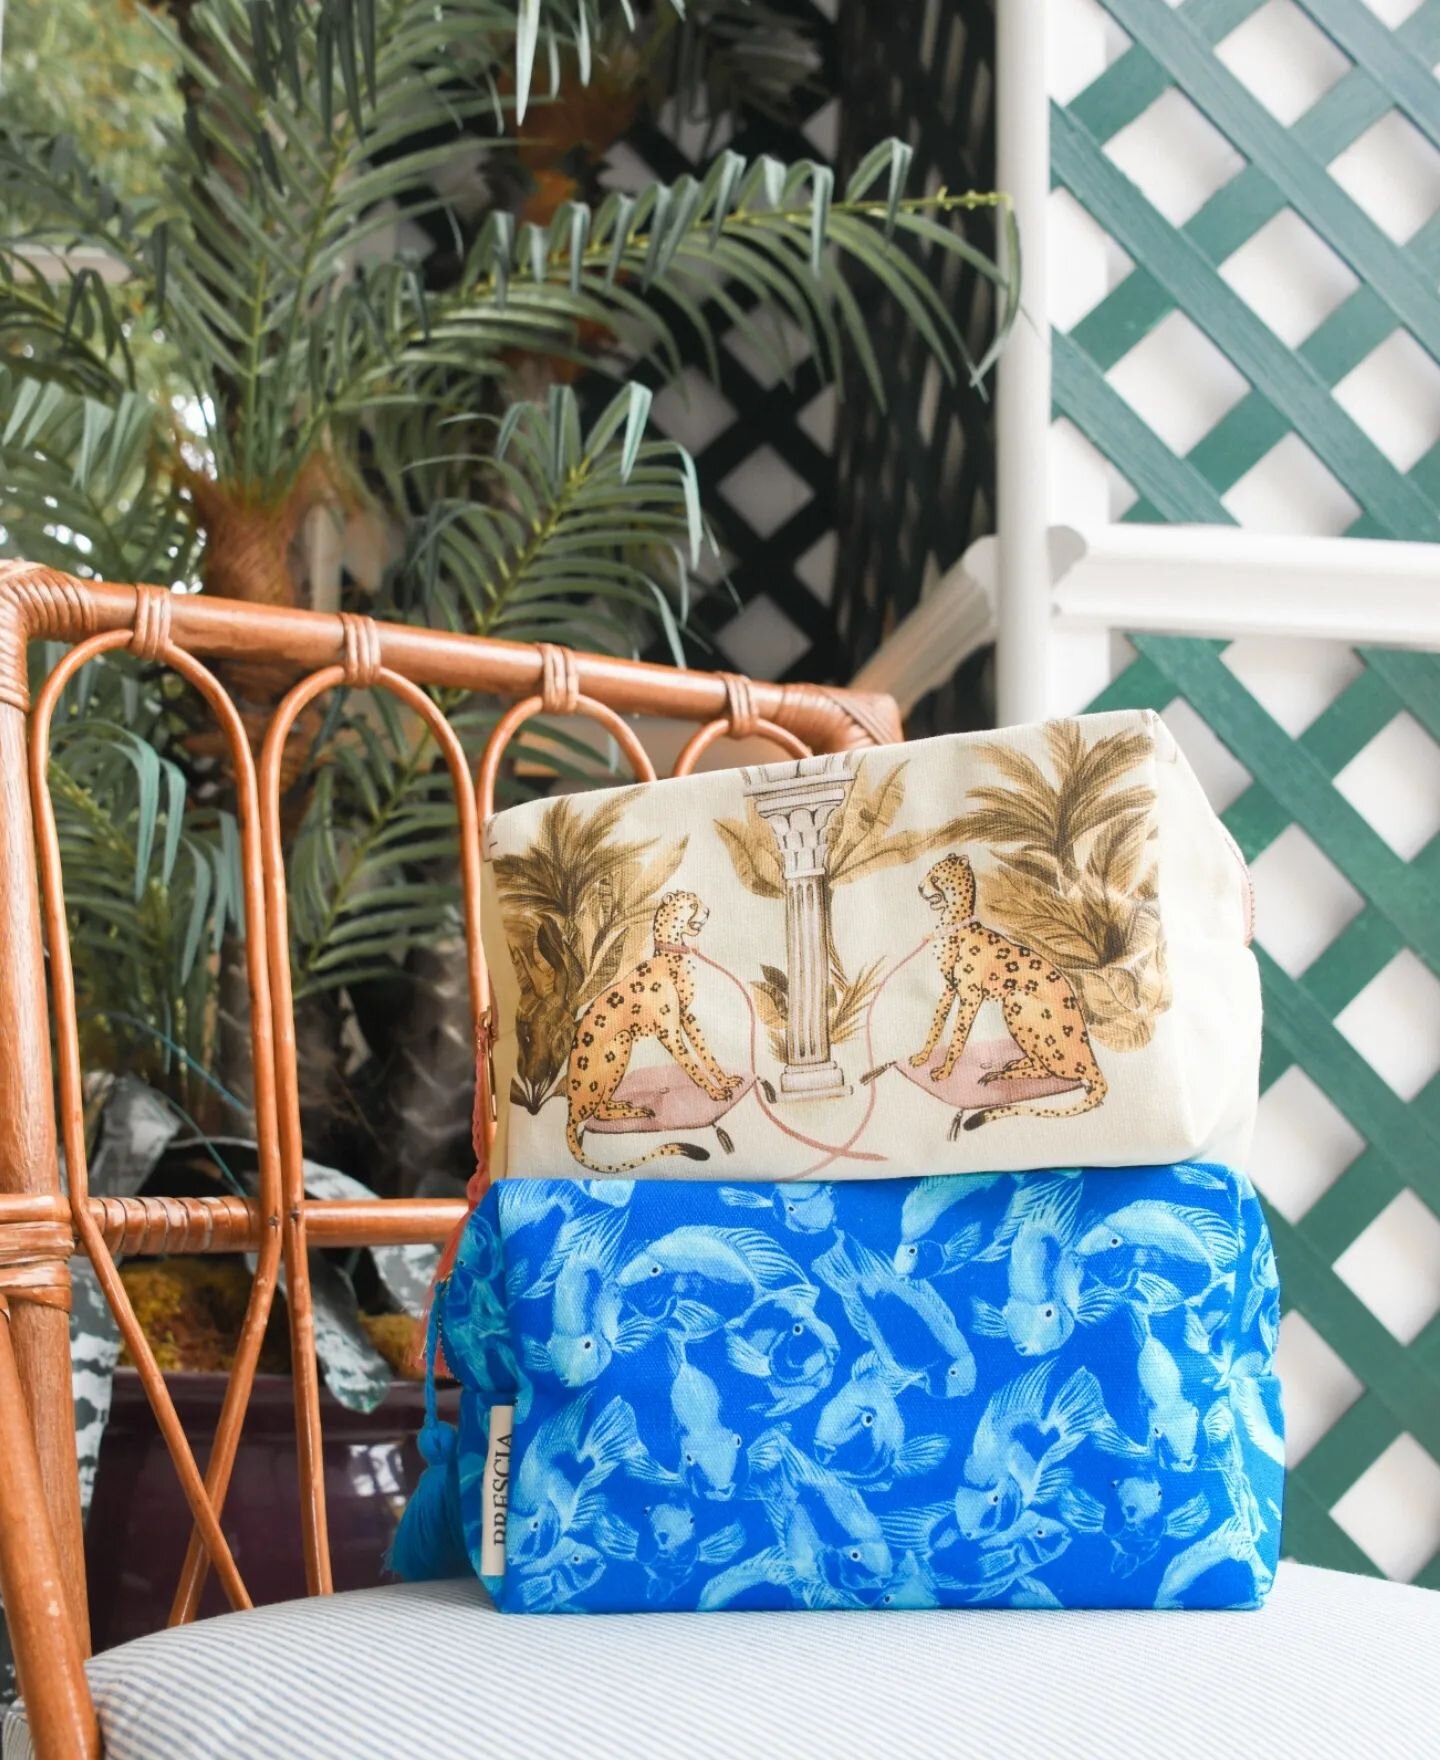 Nothing says Palm Beach like vibrant colors and fauna motifs. (Swipe to see a real Regal Feline)